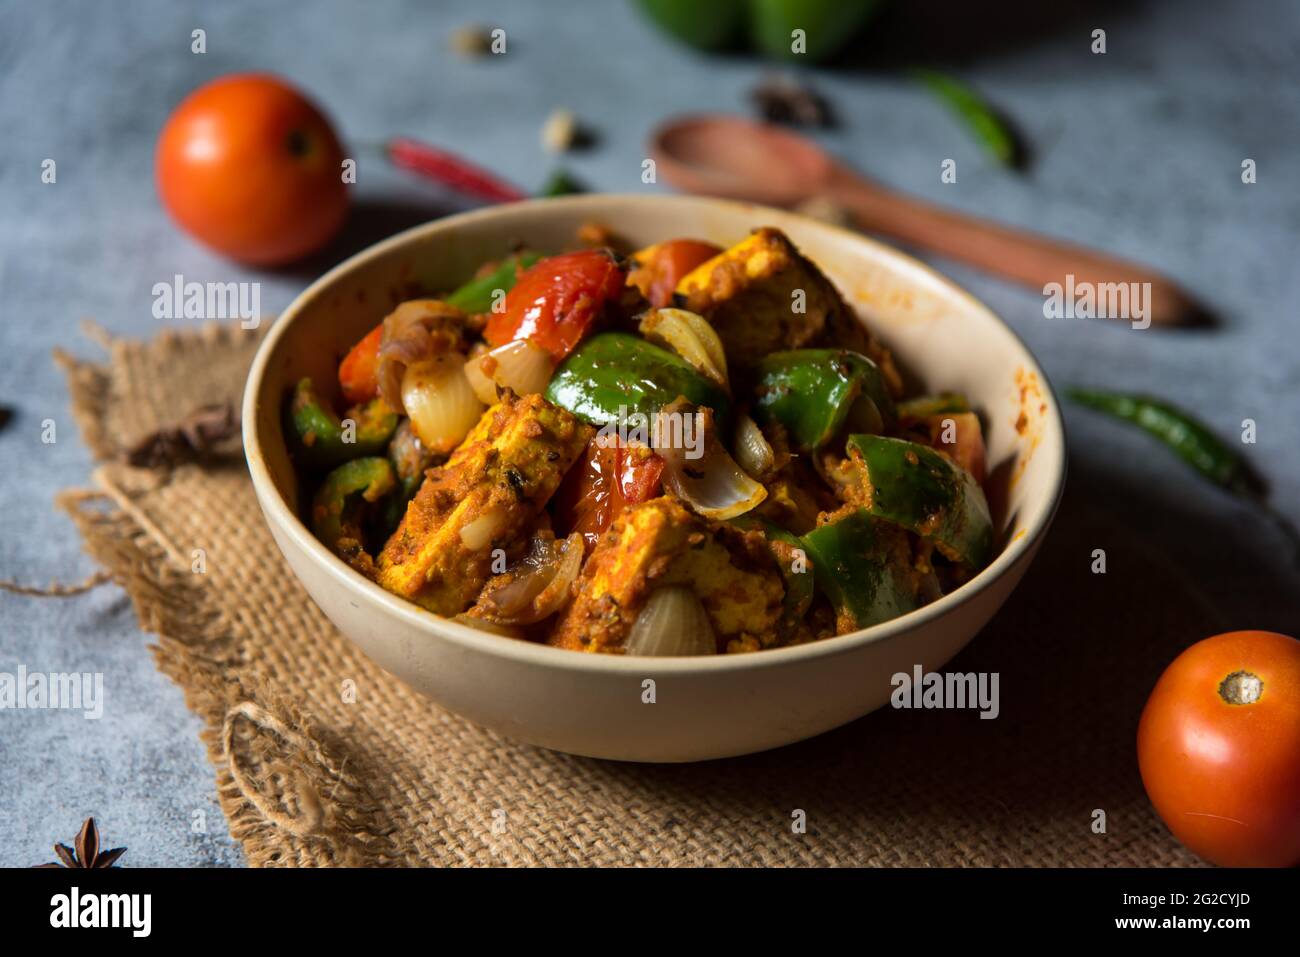 https://c8.alamy.com/comp/2G2CYJD/kadai-paneer-a-popular-north-indian-semi-dry-dish-made-by-cooking-paneer-or-cottage-cheese-tomatoes-and-bell-peppers-close-up-2G2CYJD.jpg